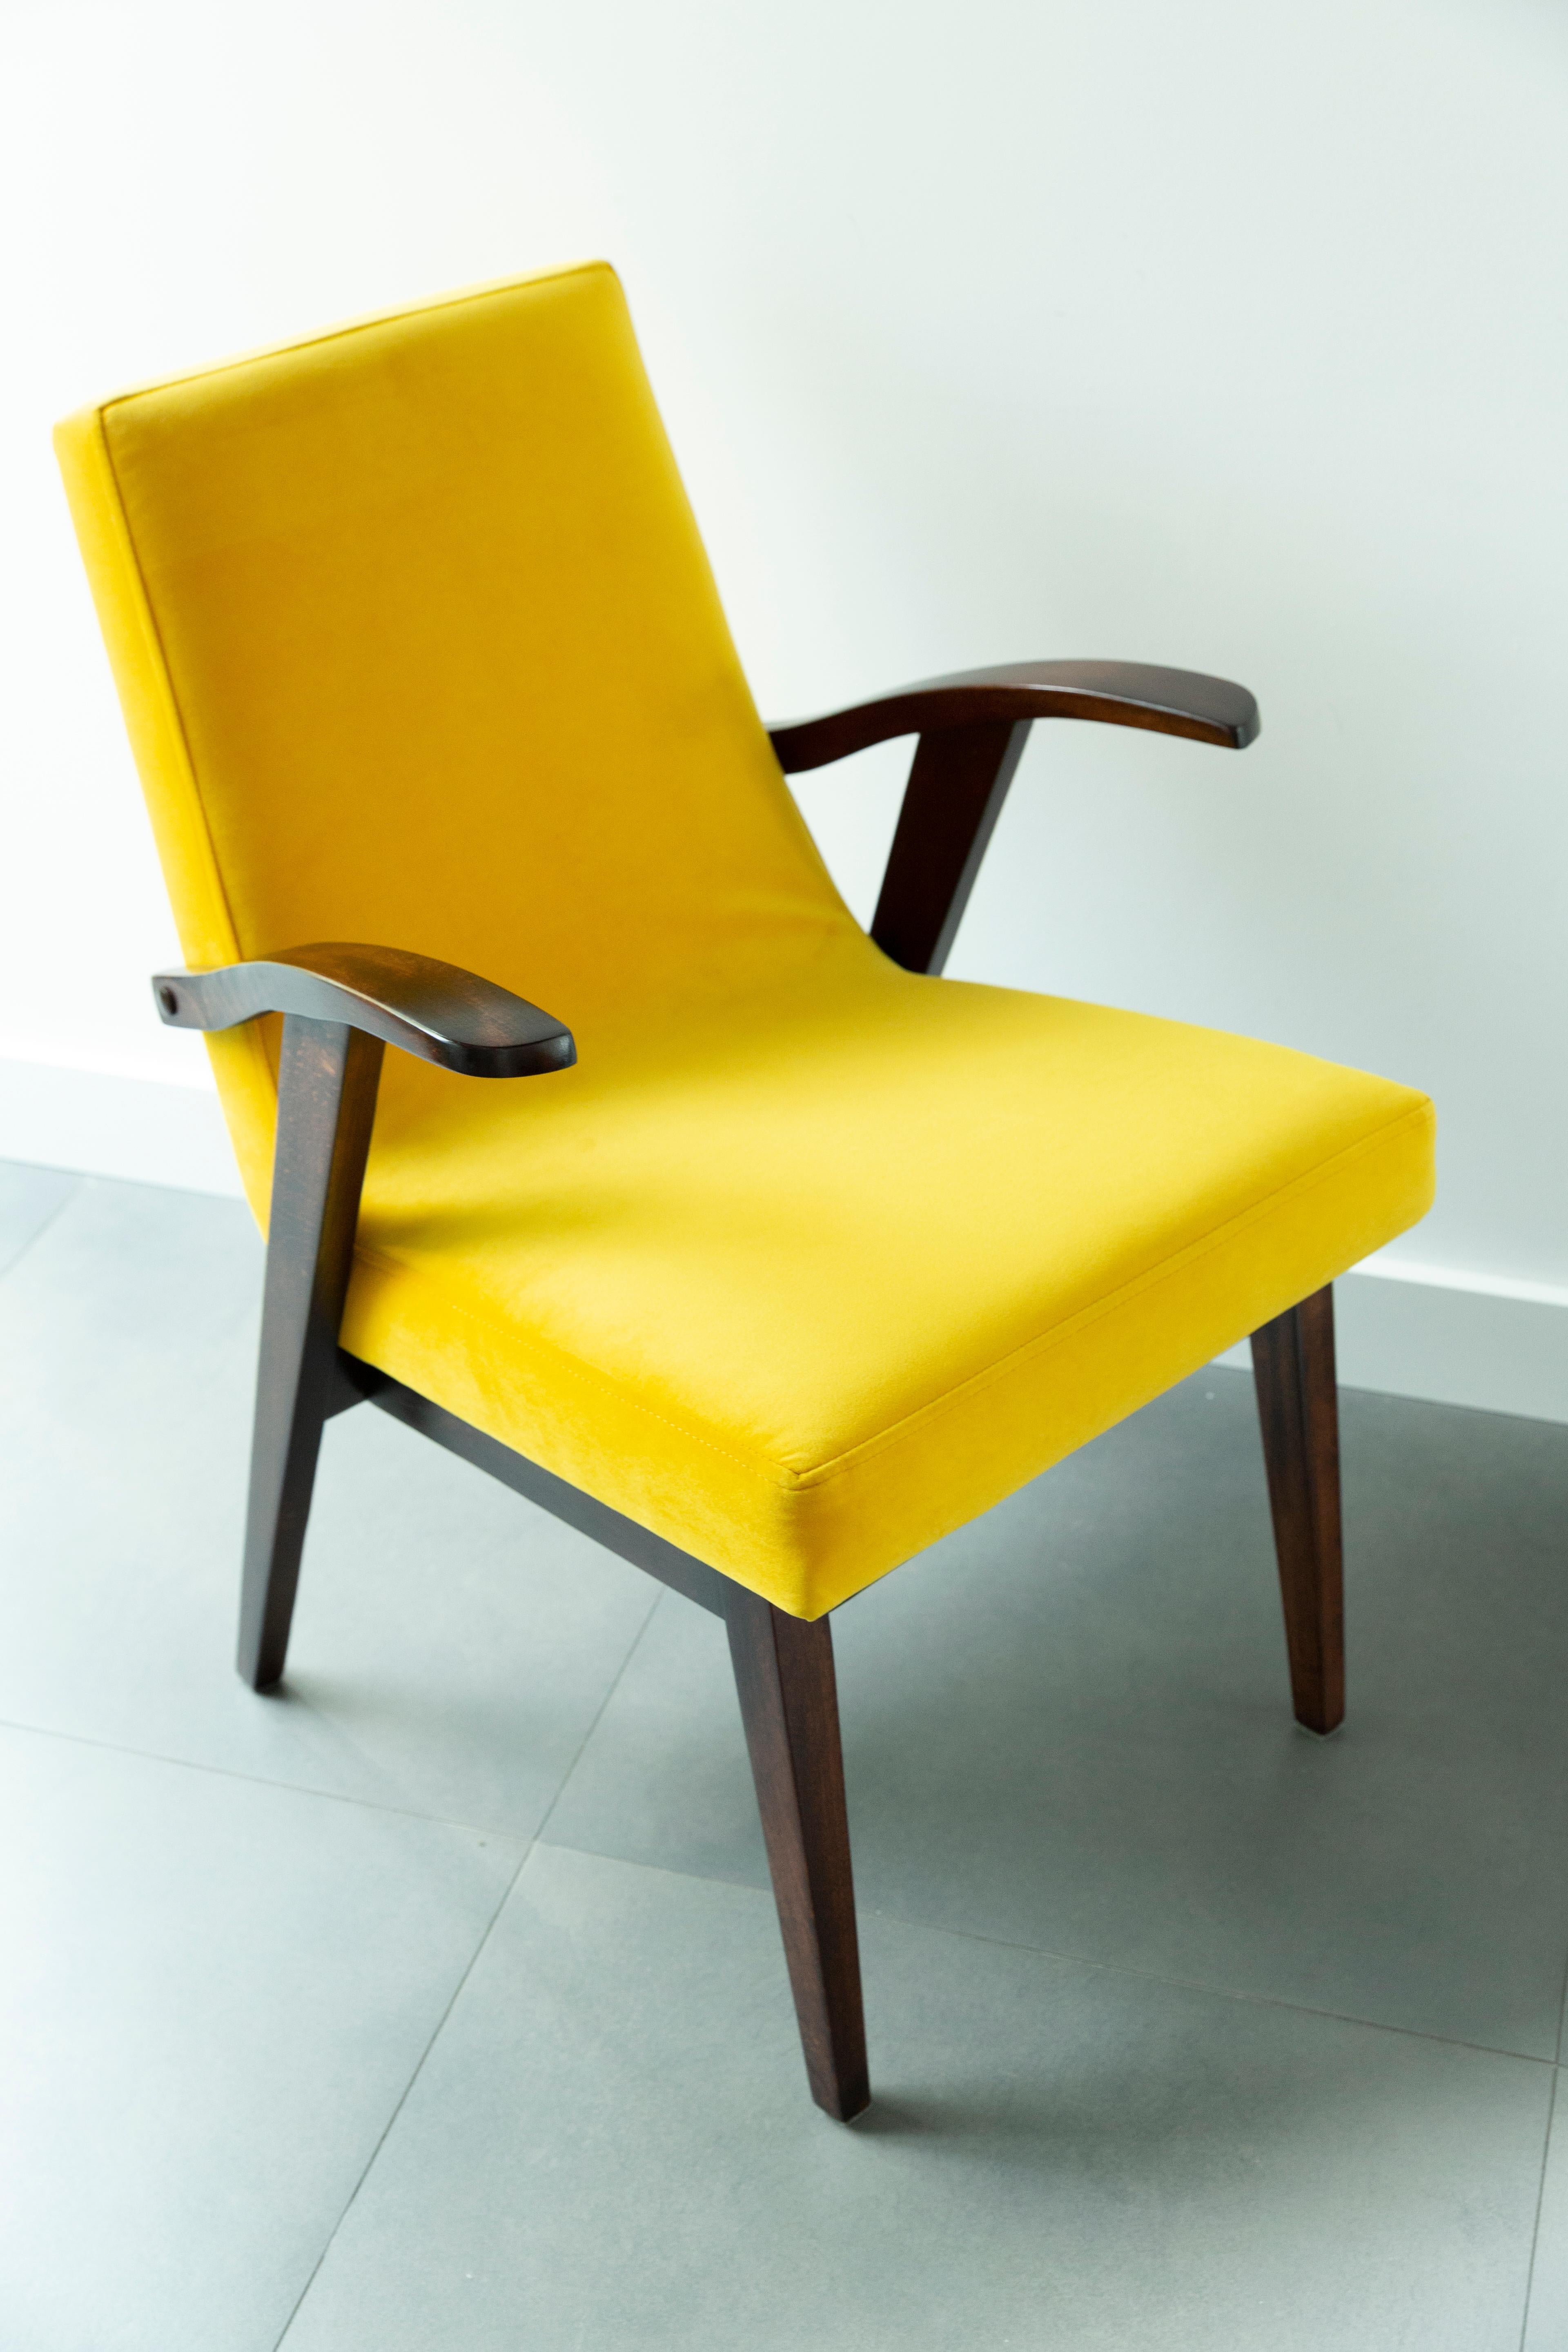 Polish Set of Four Vintage Chairs in Yellow Velvet by Mieczyslaw Puchala, 1960s For Sale